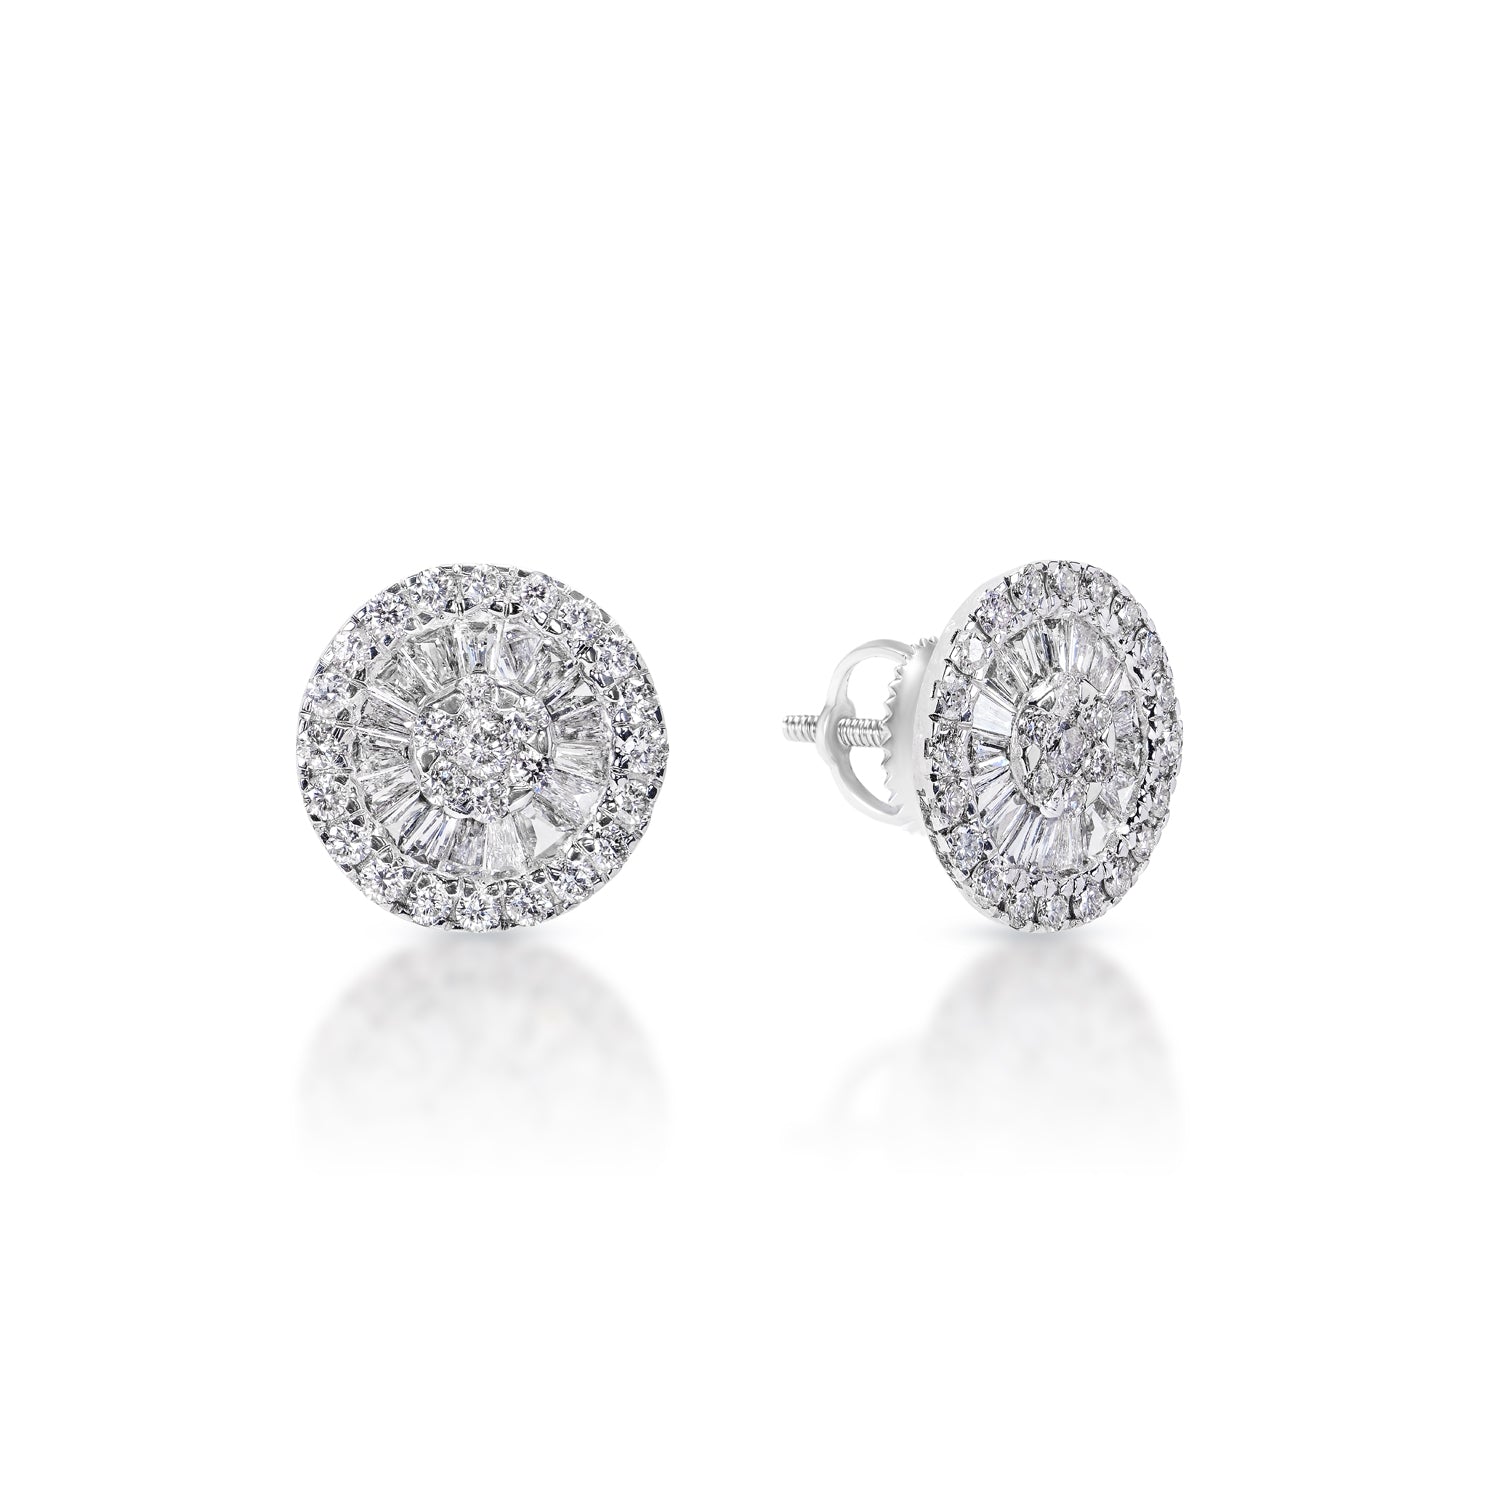 1 Carat Combine Mixed Shape Diamond Stud Earrings in 14k White Gold Front and Side View